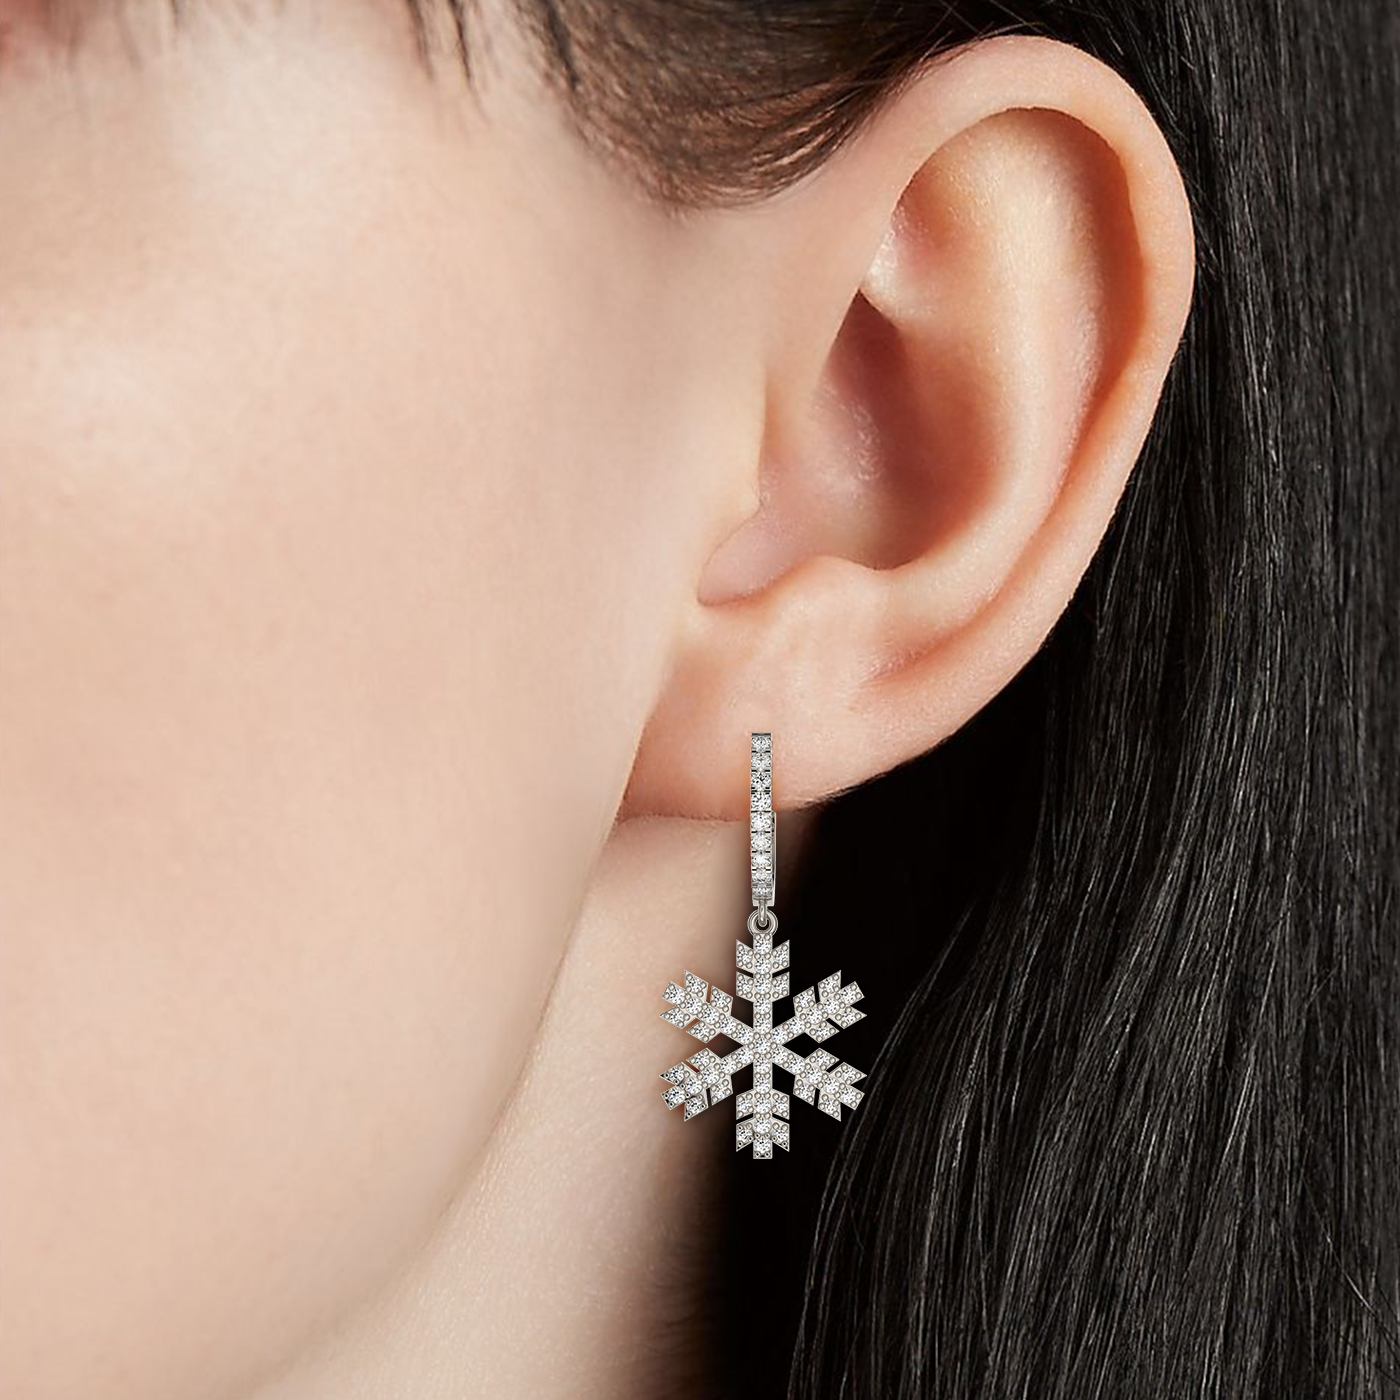 Natural 1.0 CT. Diamond Snowflake Earrings in 14K White Gold Christmas Gift Jewelry